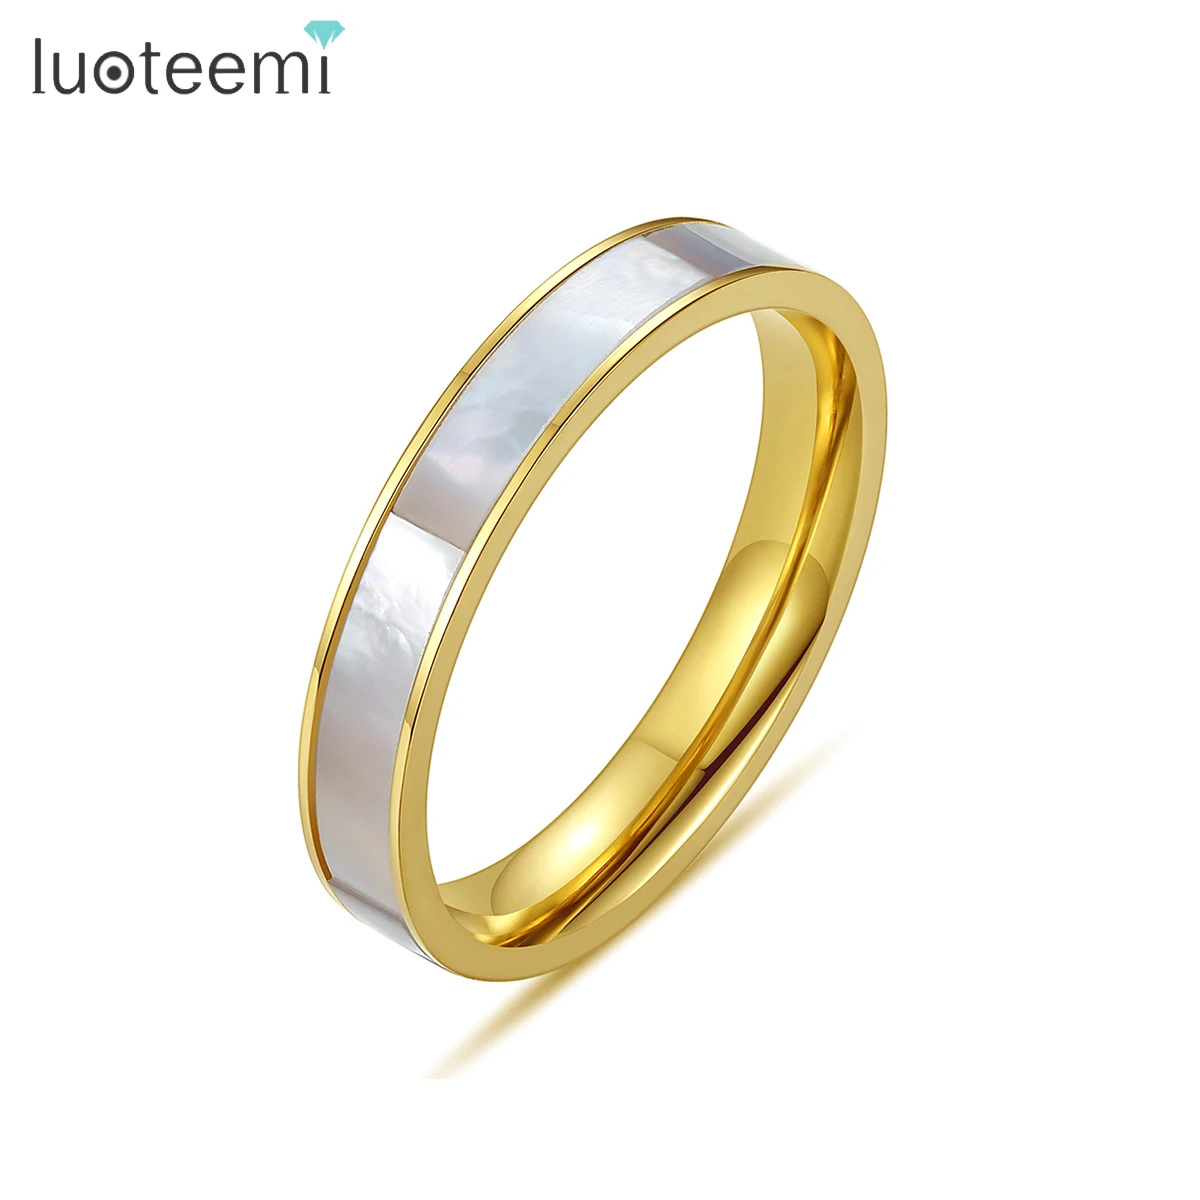 

SP-LAM Hot Selling Rings Women Vacuum Gold Plated Stainless Steel Band Girls Finger Fashion Ring